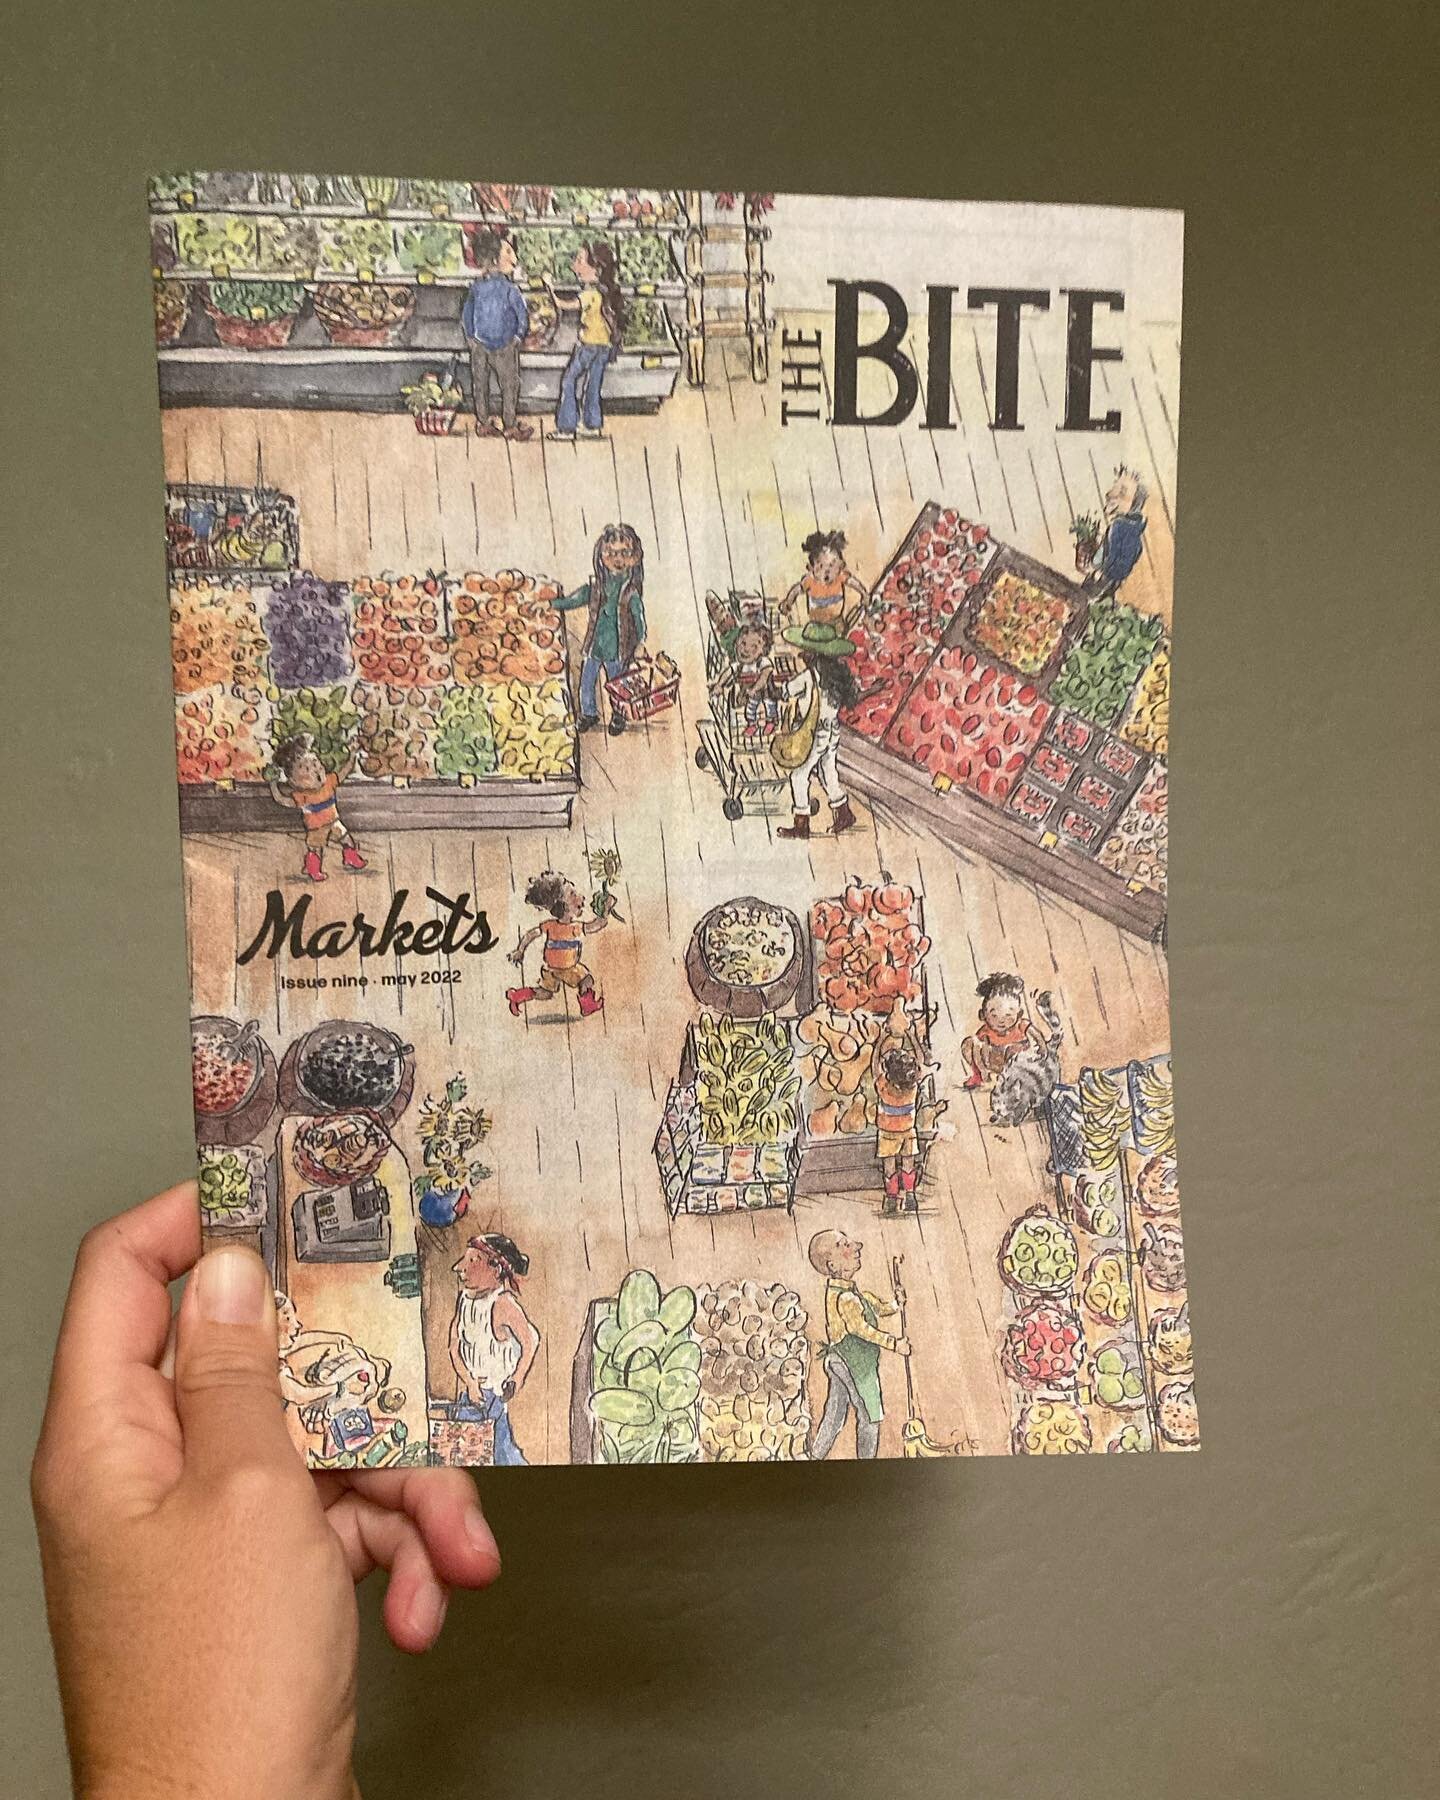 I had the pleasure of writing about Nelson&rsquo;s Meats in the May issue of @thebitenm. 
I figured I should mention this before the month is up!

In all honesty, it feels hard to be excited about anything right now with the heaviness in our world. F